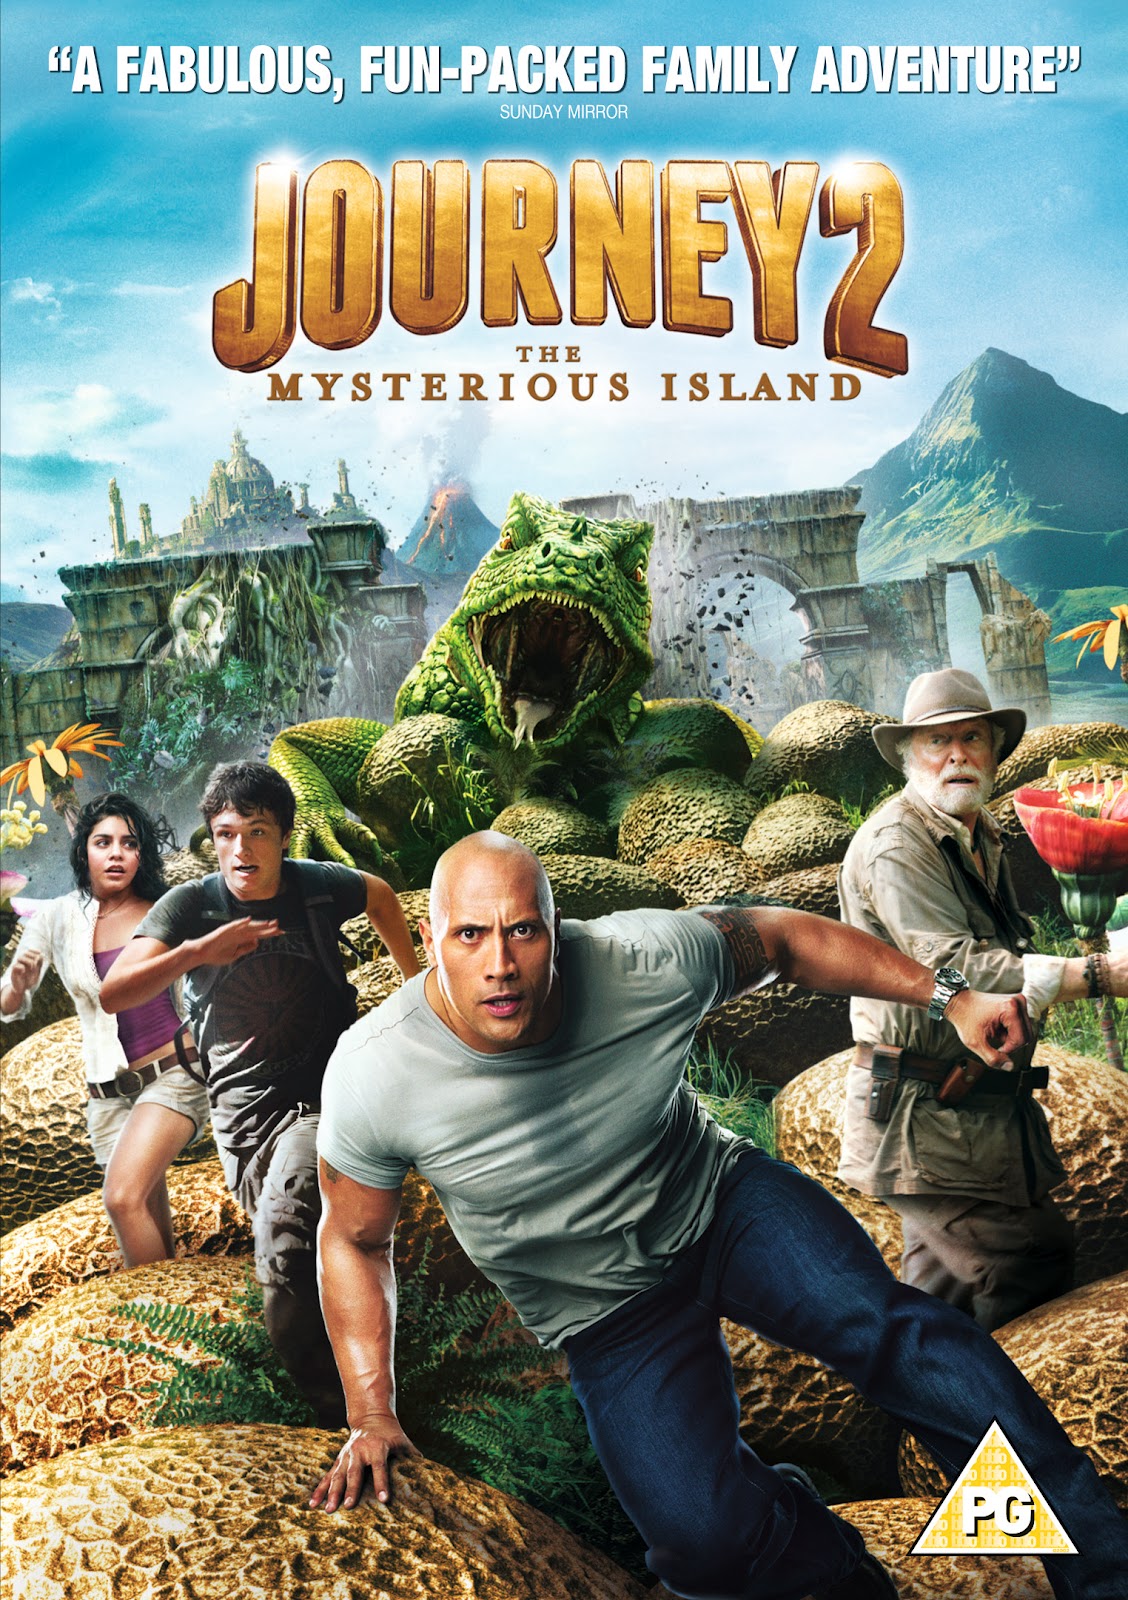 Mum of 3 Boys: Journey 2 - The Mysterious Island Review